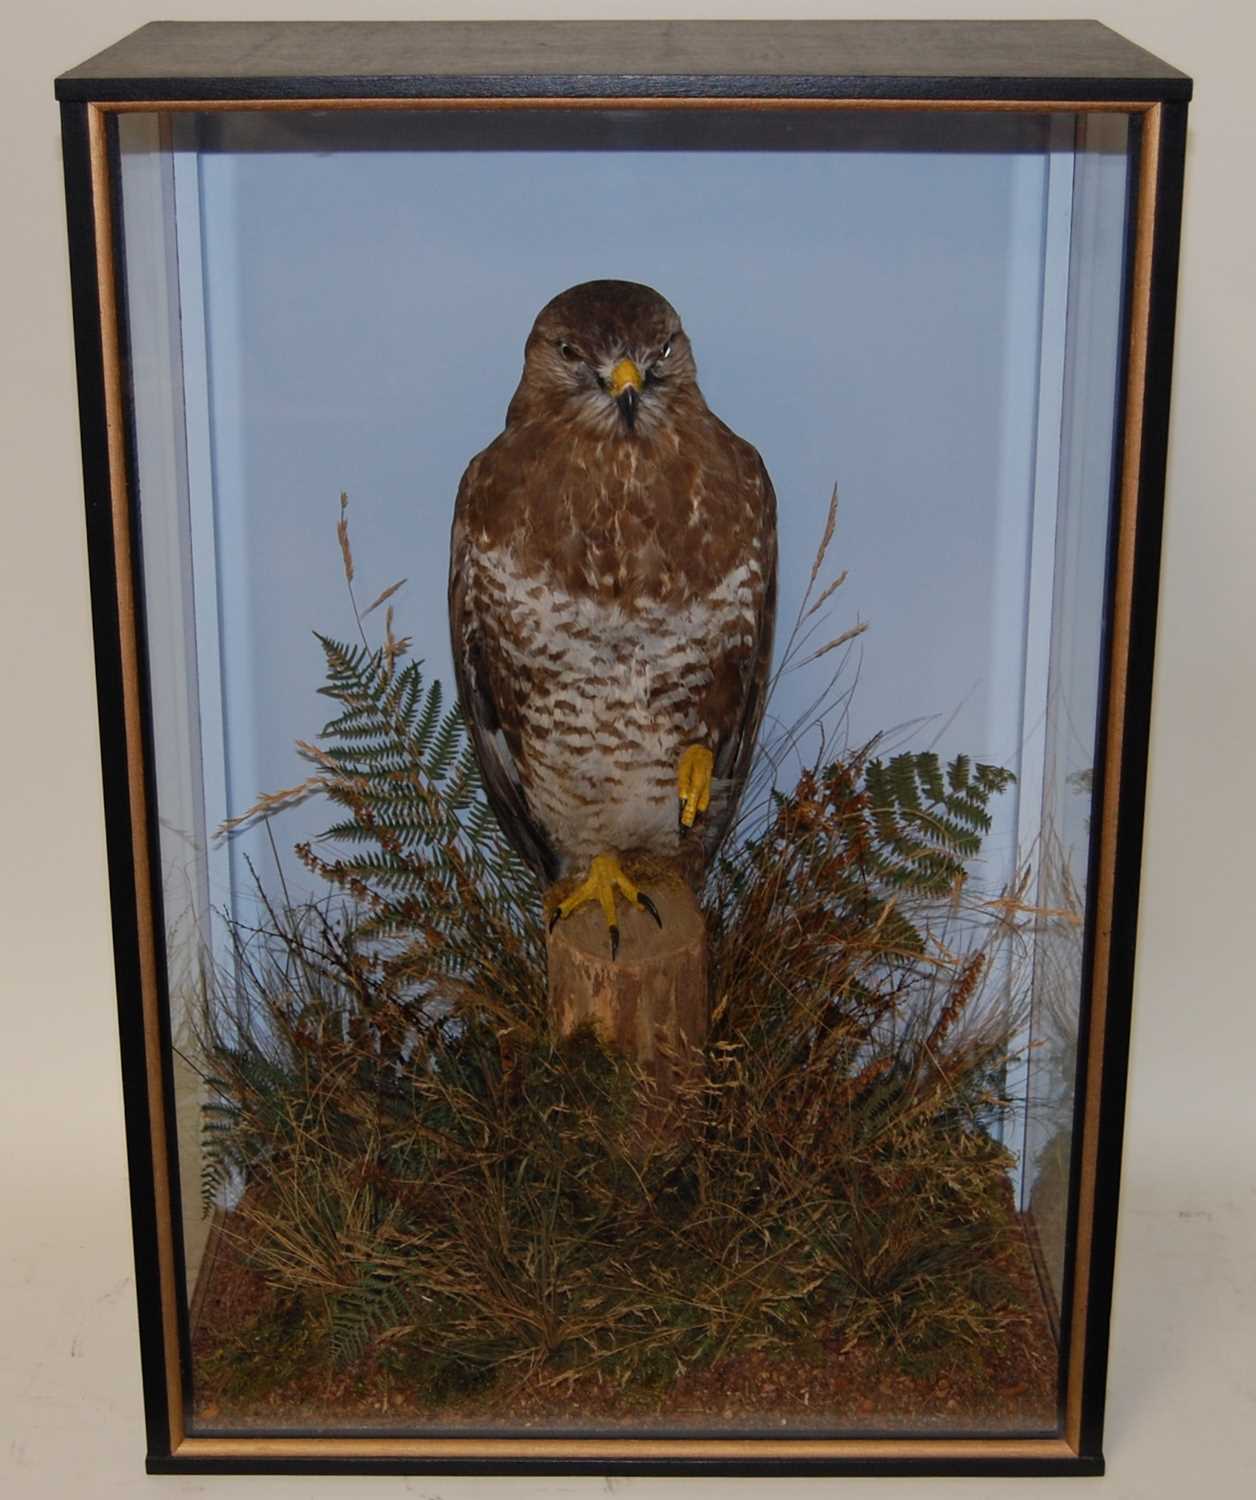 * A taxidermy Buzzard (Buteo buteo), full mount, perched on a stump amidst tall grasses and